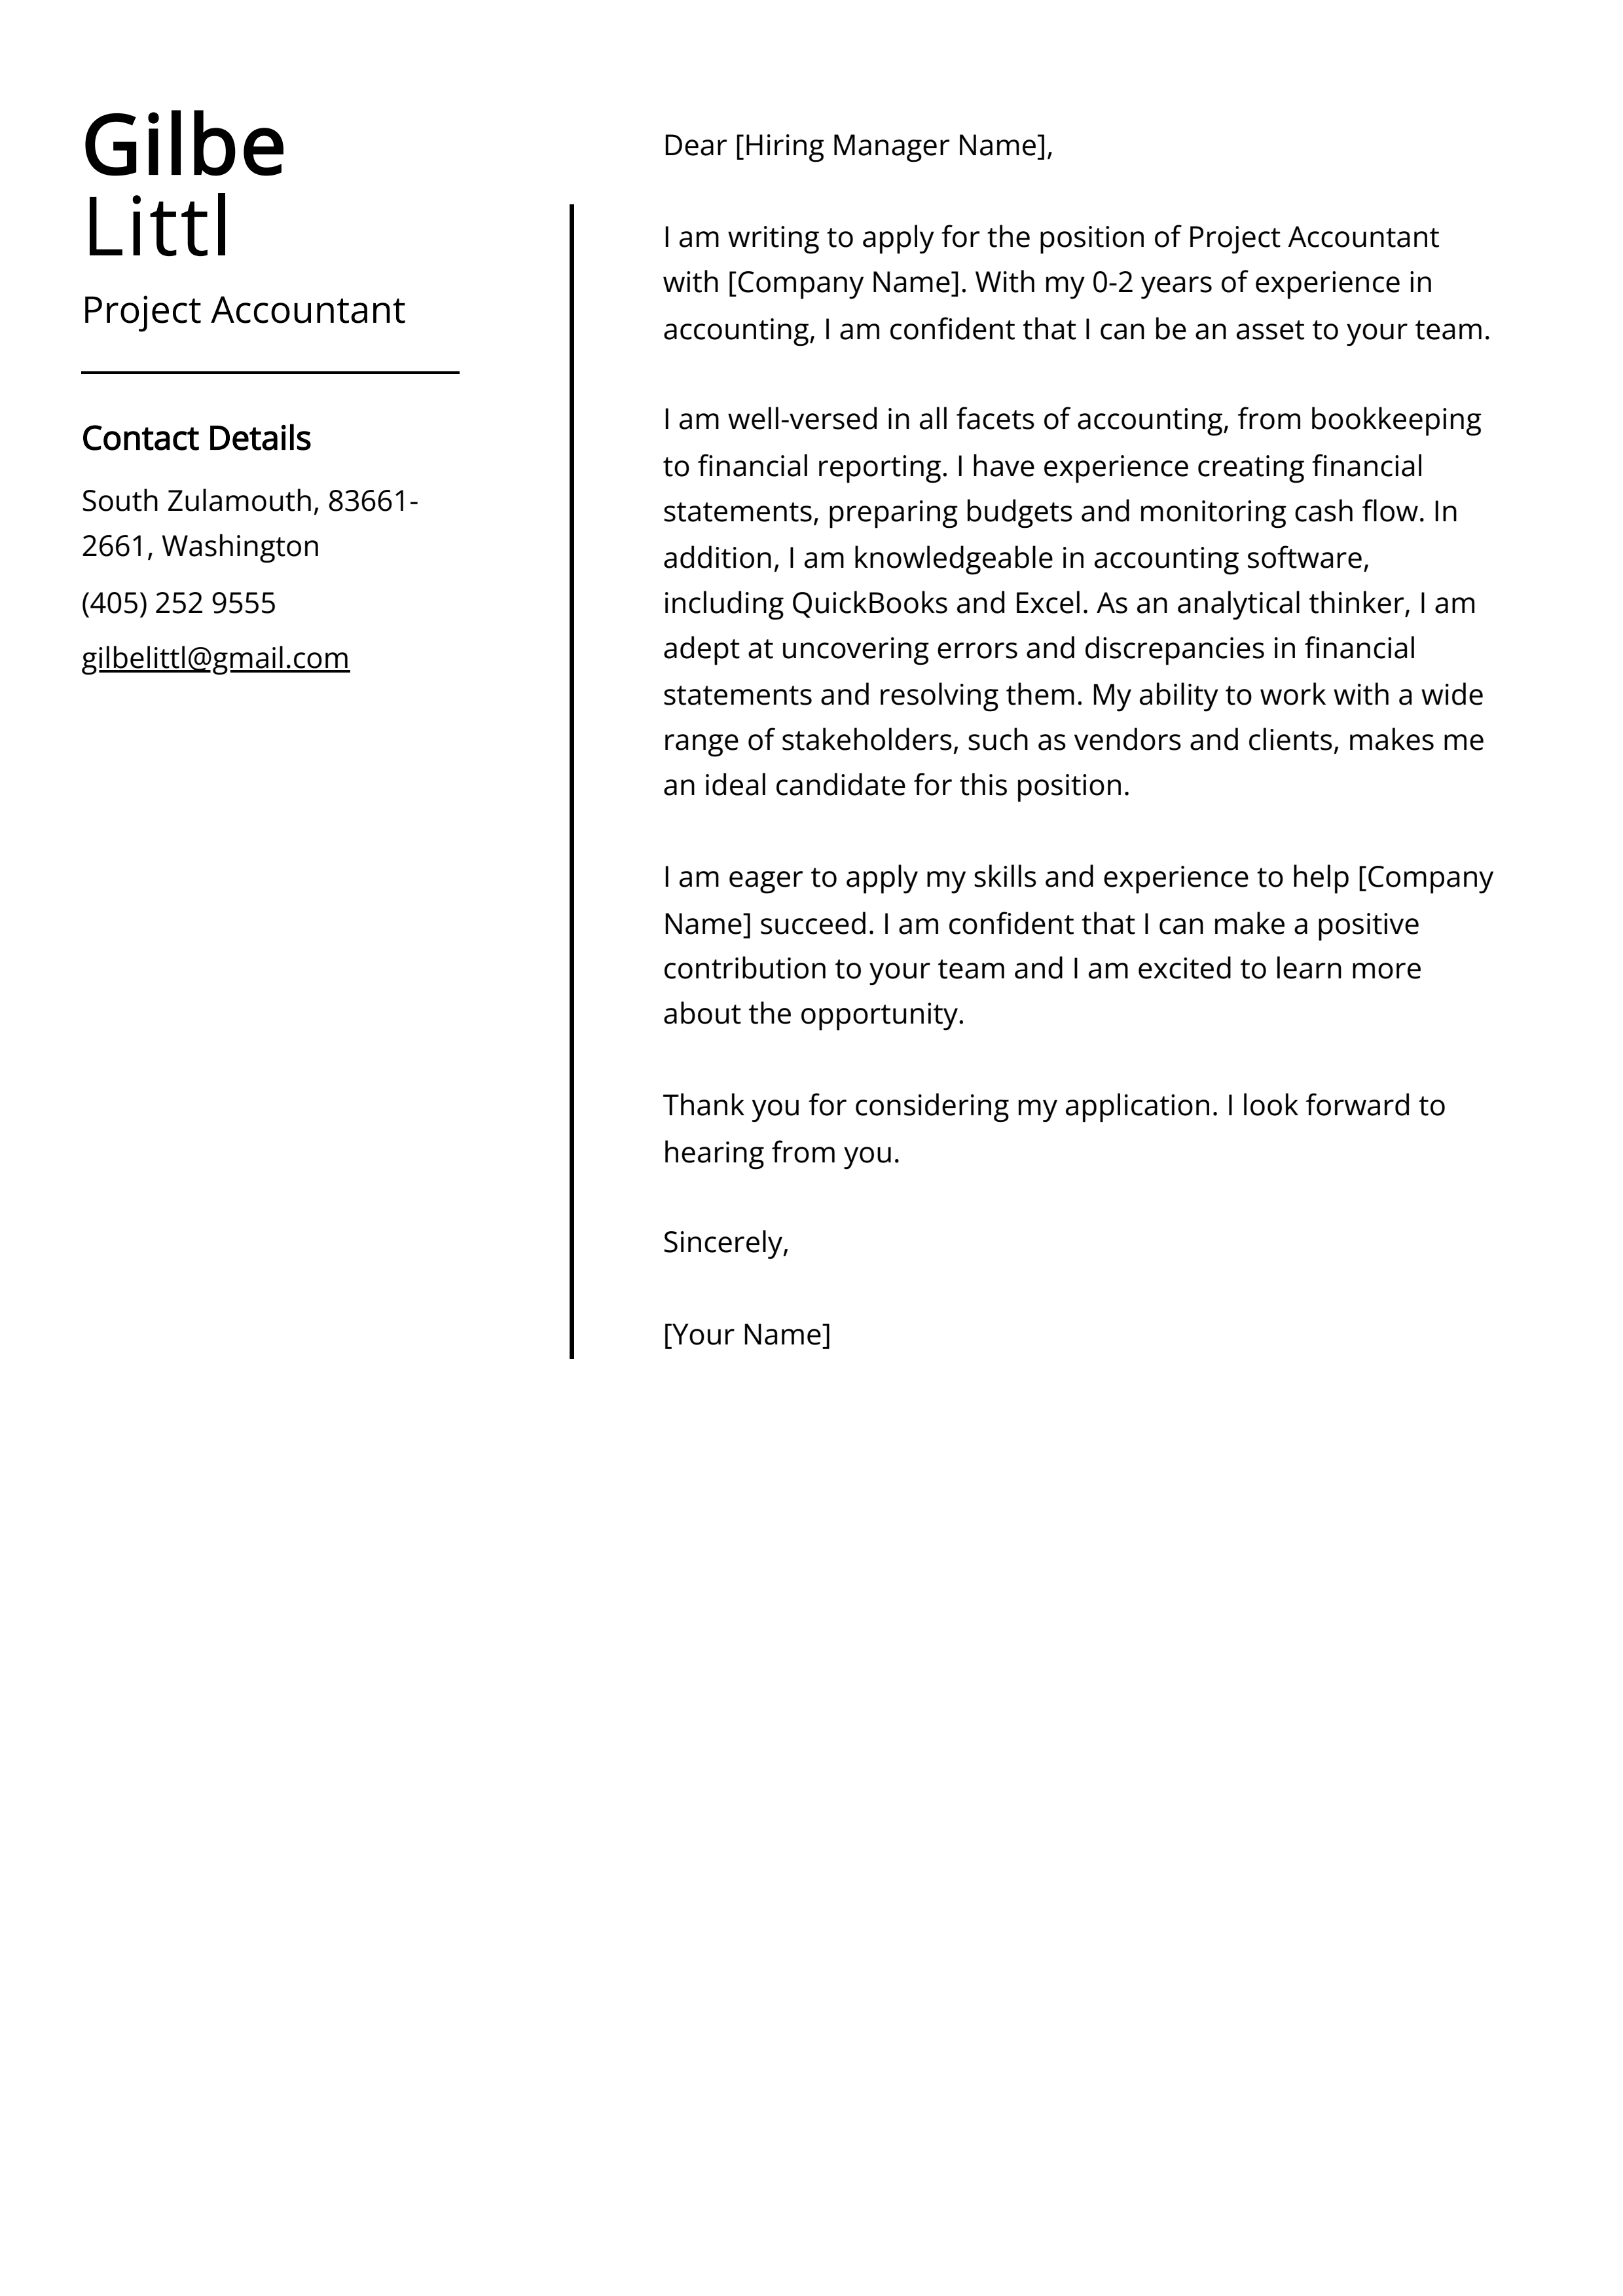 Project Accountant Cover Letter Example